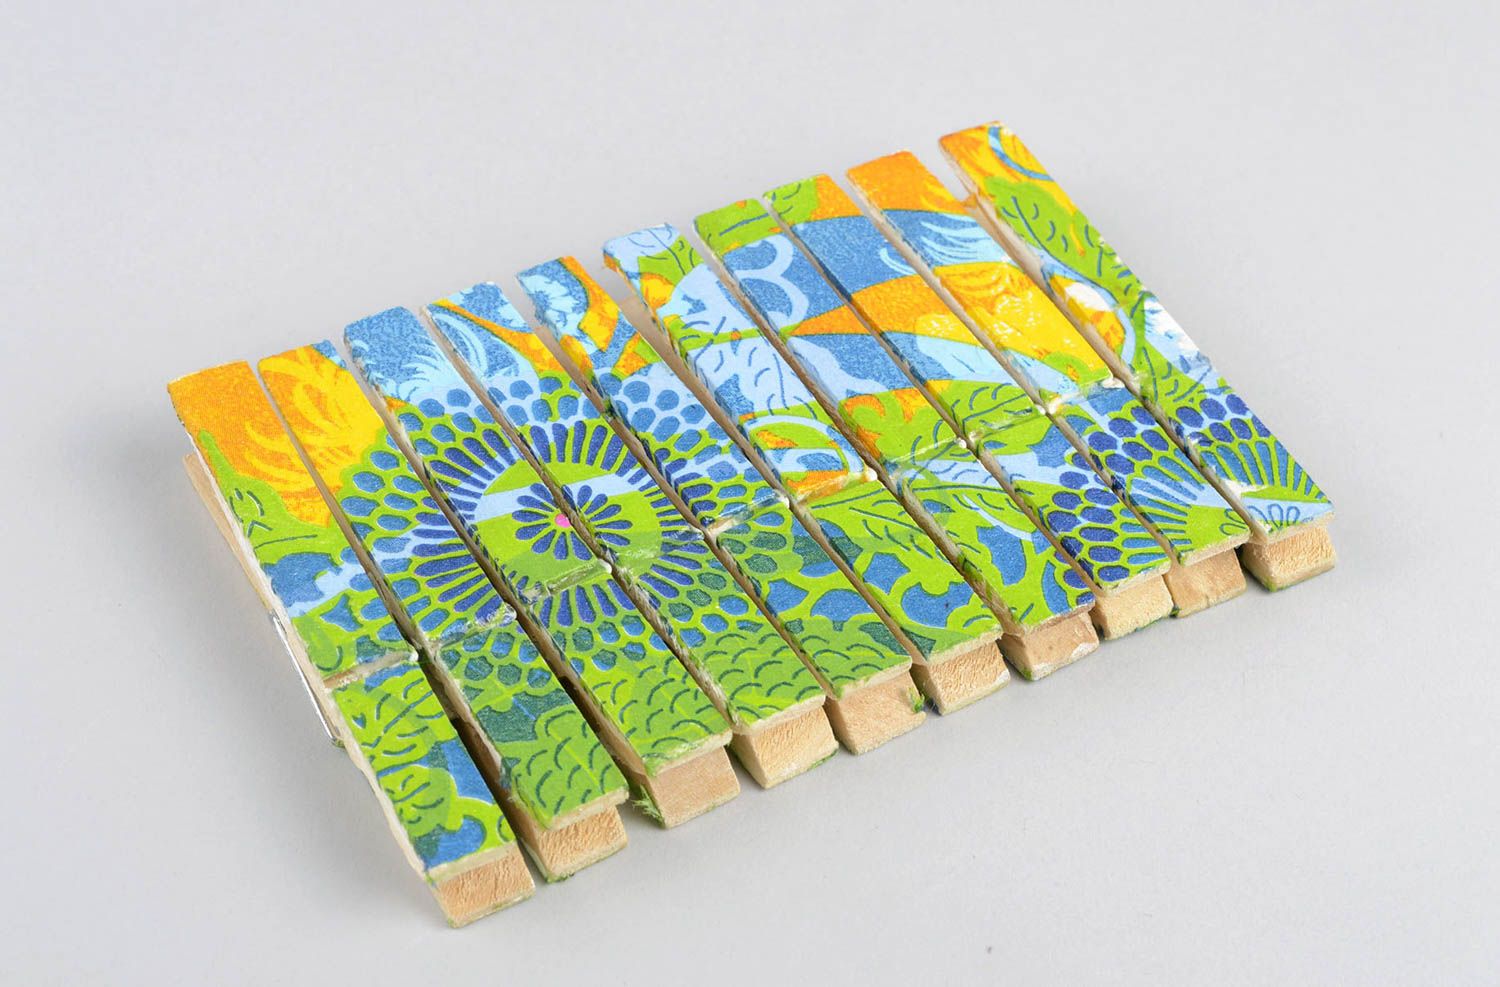 Handmade pegs unusual gift wooden pegs decorative clothespins set of 10 items photo 1